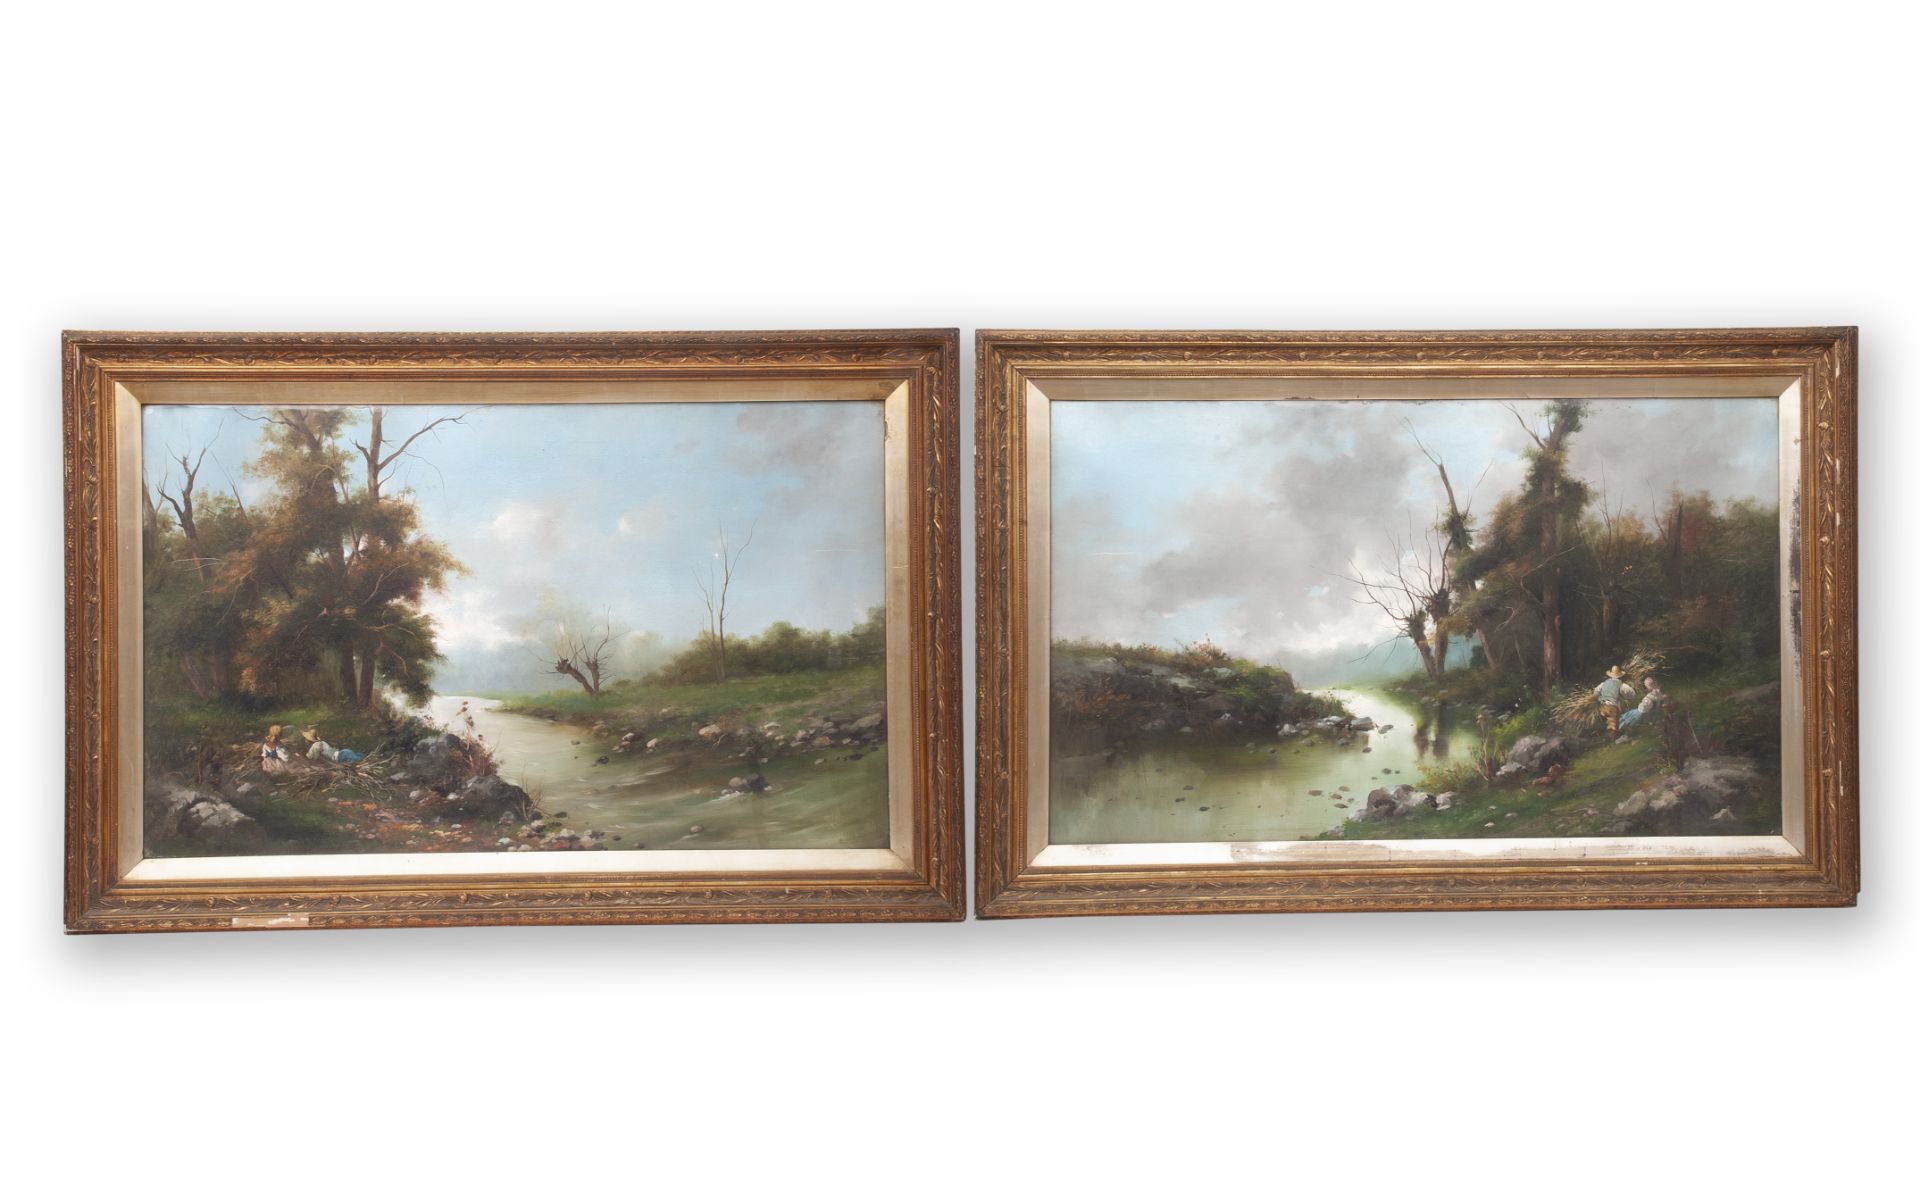 A VERY LARGE PAIR OF LATE 19TH CENTURY LANDSCAPE PAINTINGS